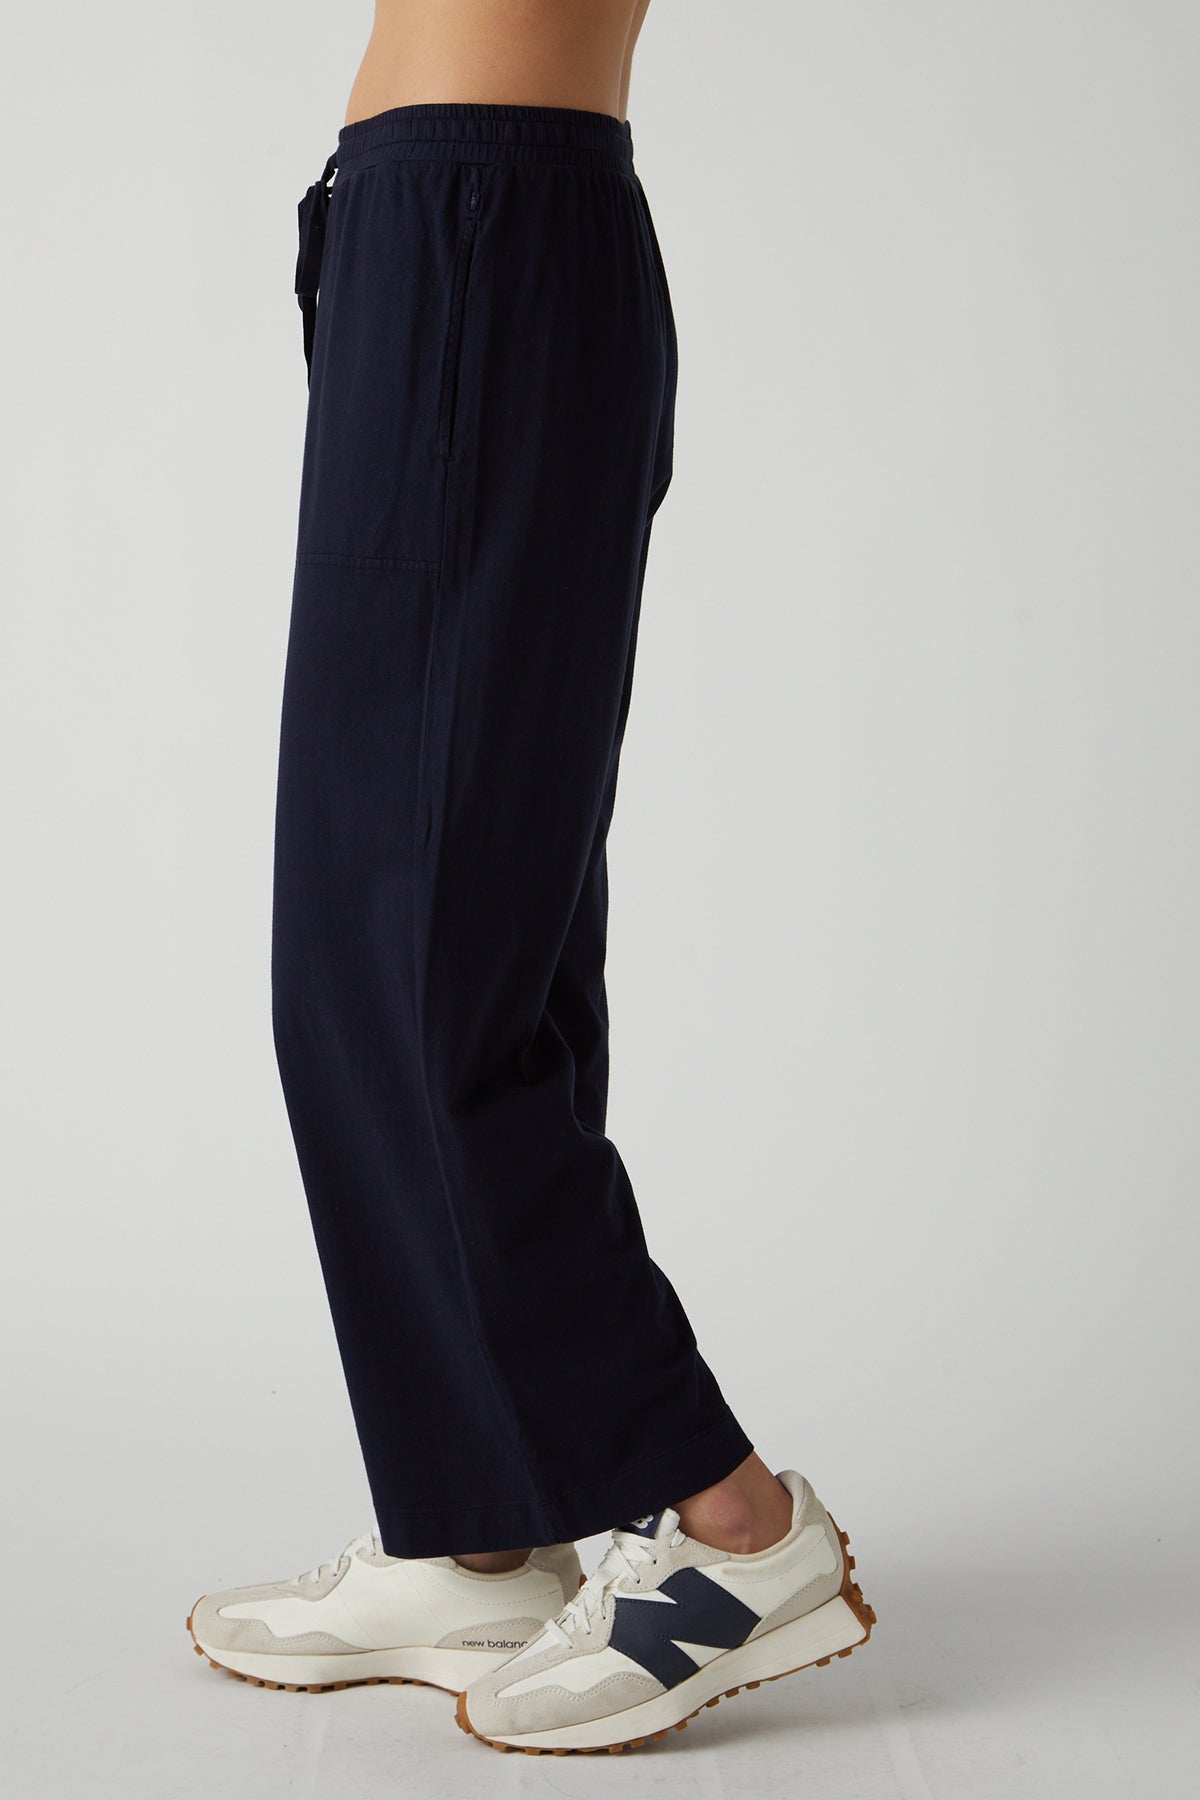 Pismo Pant in navy side-25156538990785